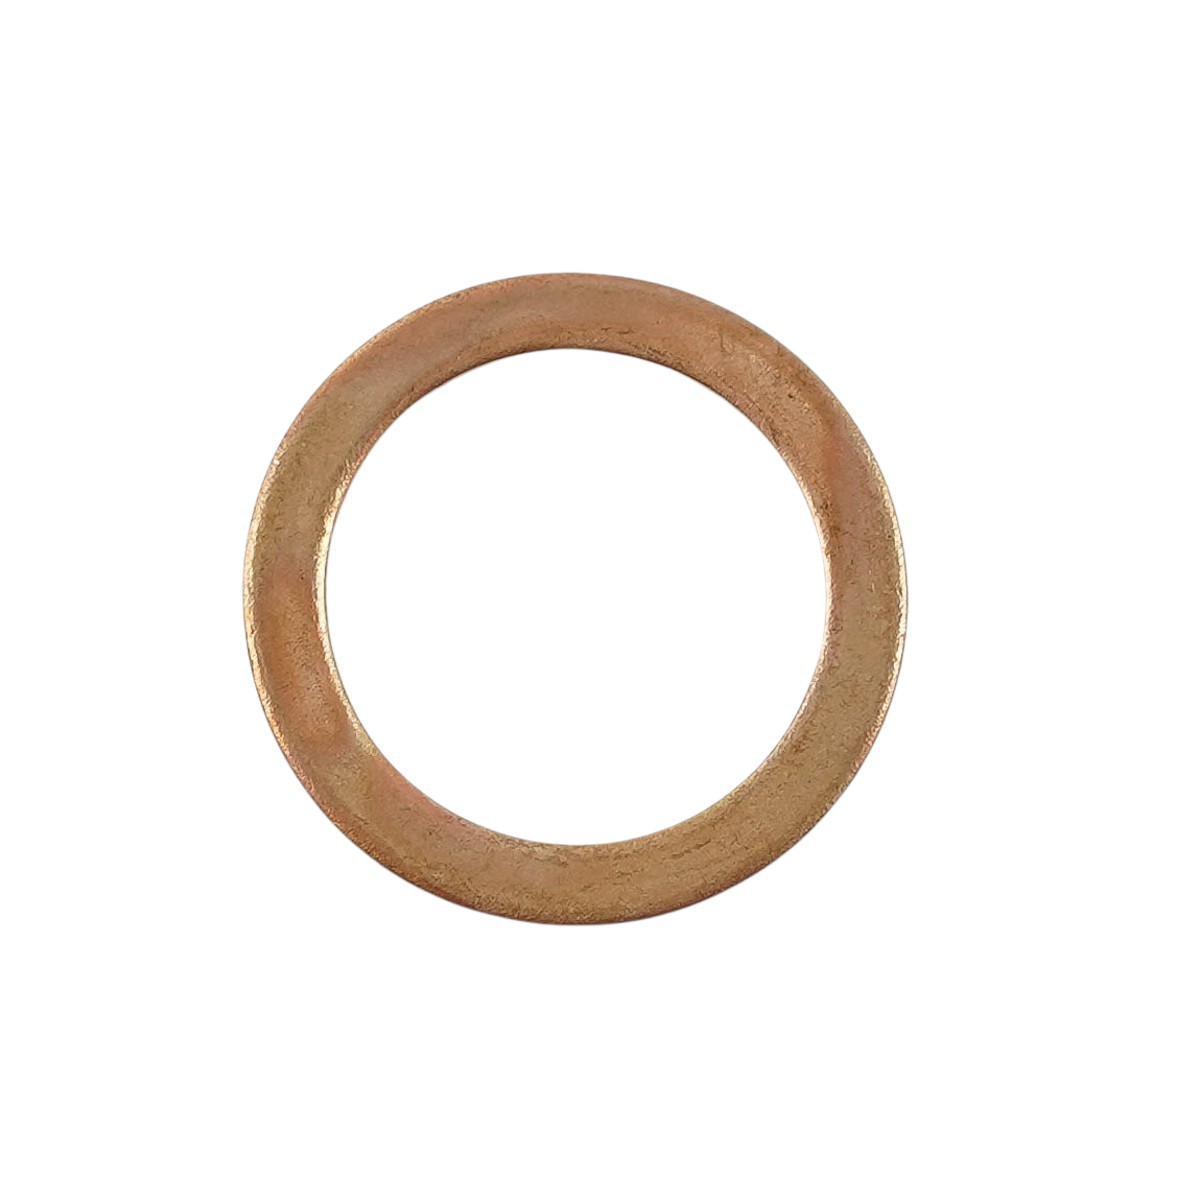 Copper washer / TRG823 / Ls Tractor 40012103